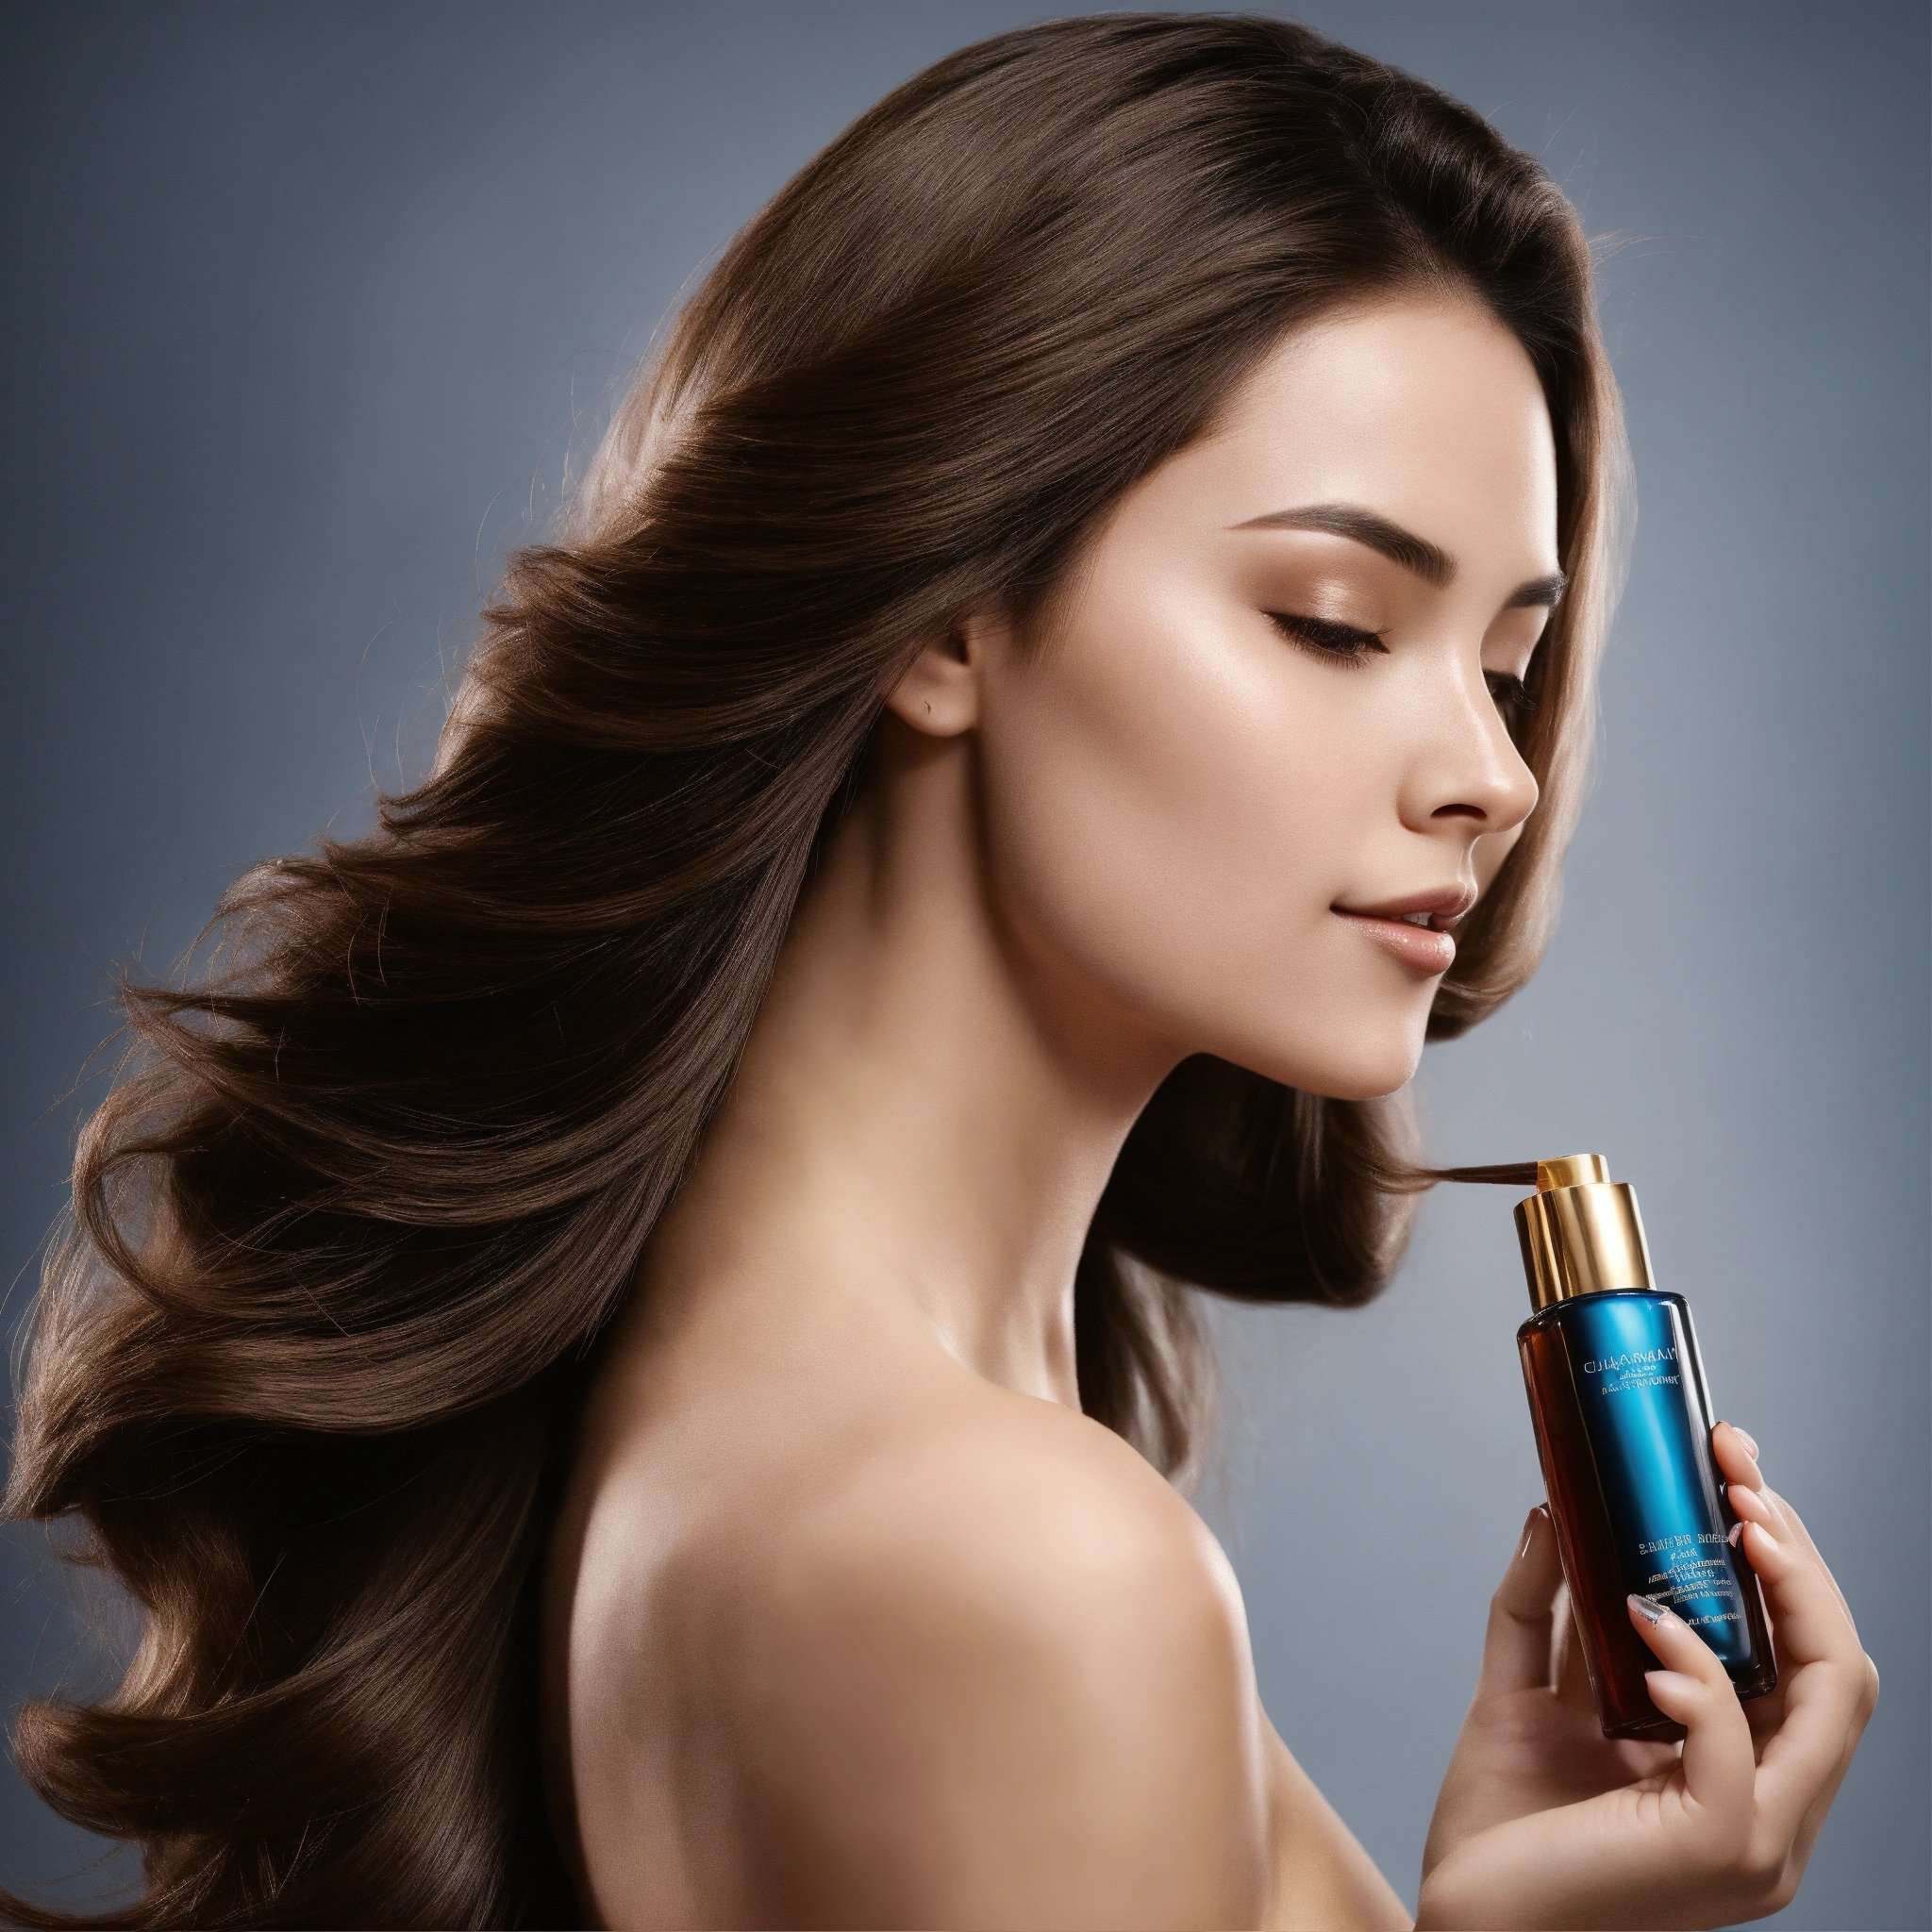 Mineral Oil for Hair: The Good, The Bad, and The Expert Opinion